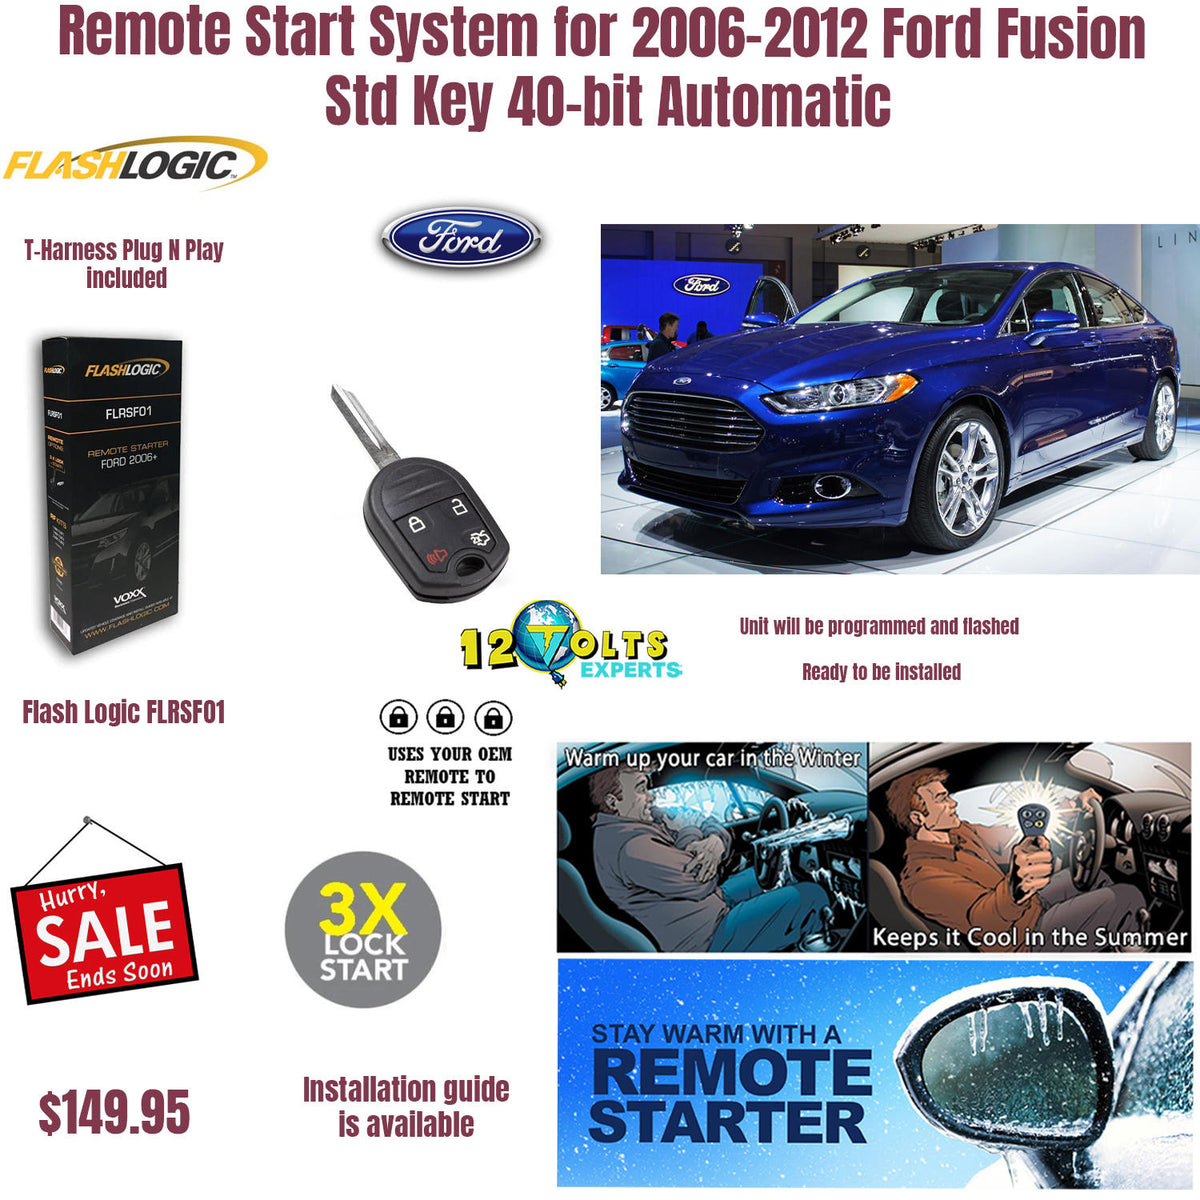 Remote Start System for 2006-2012 Ford Fusion Std Key 40-bit Automatic